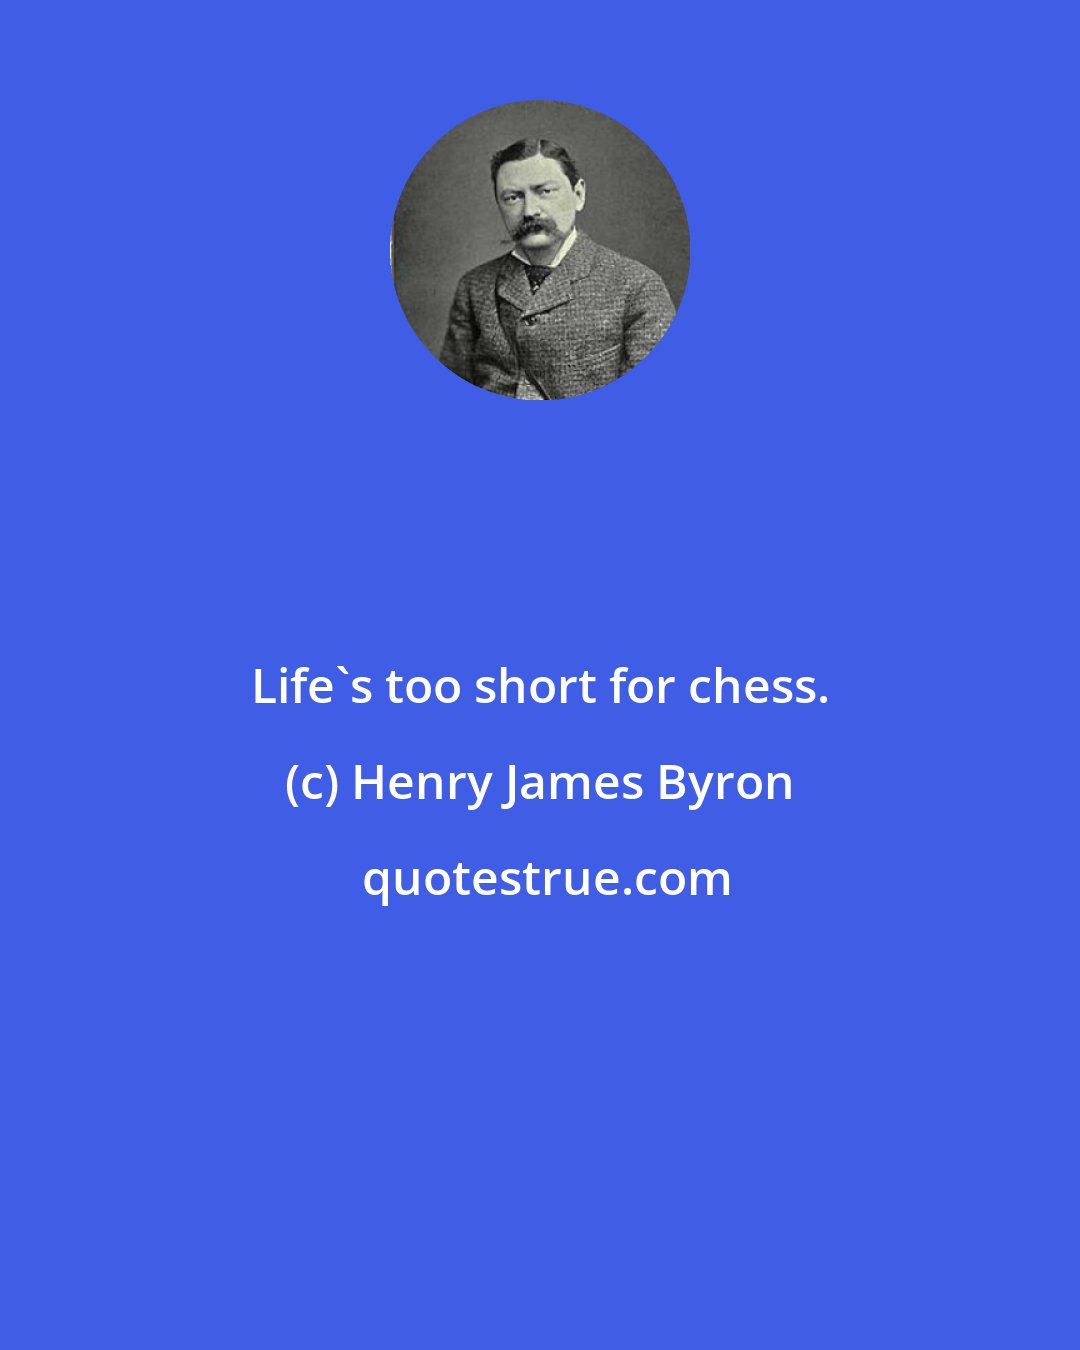 Henry James Byron: Life's too short for chess.